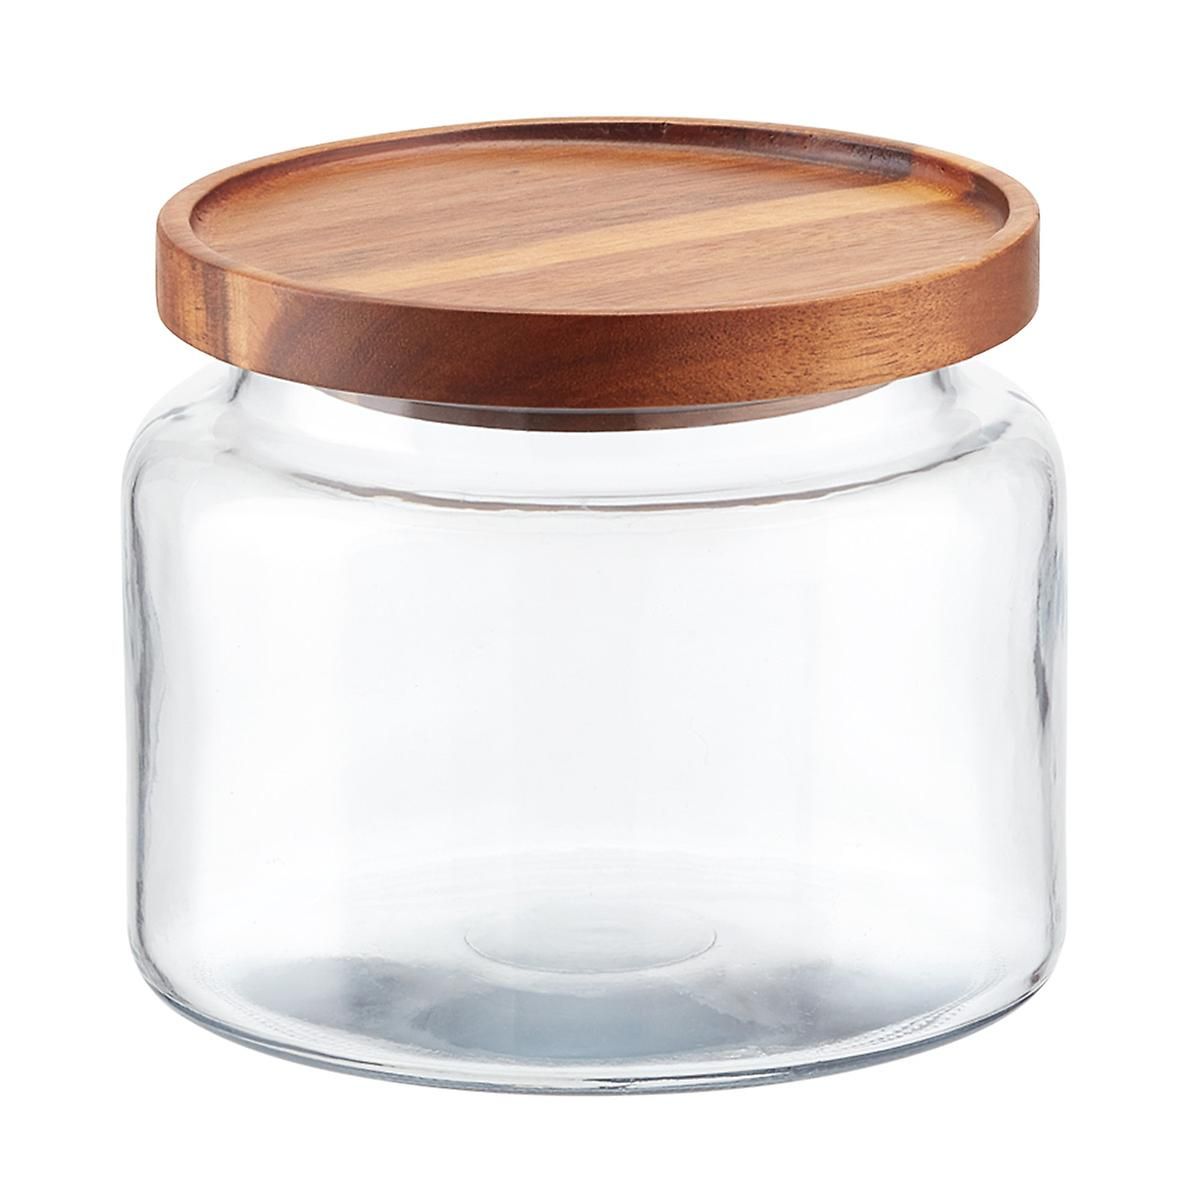 Anchor Hocking Montana Glass Canisters with Acacia Lids | The Container Store